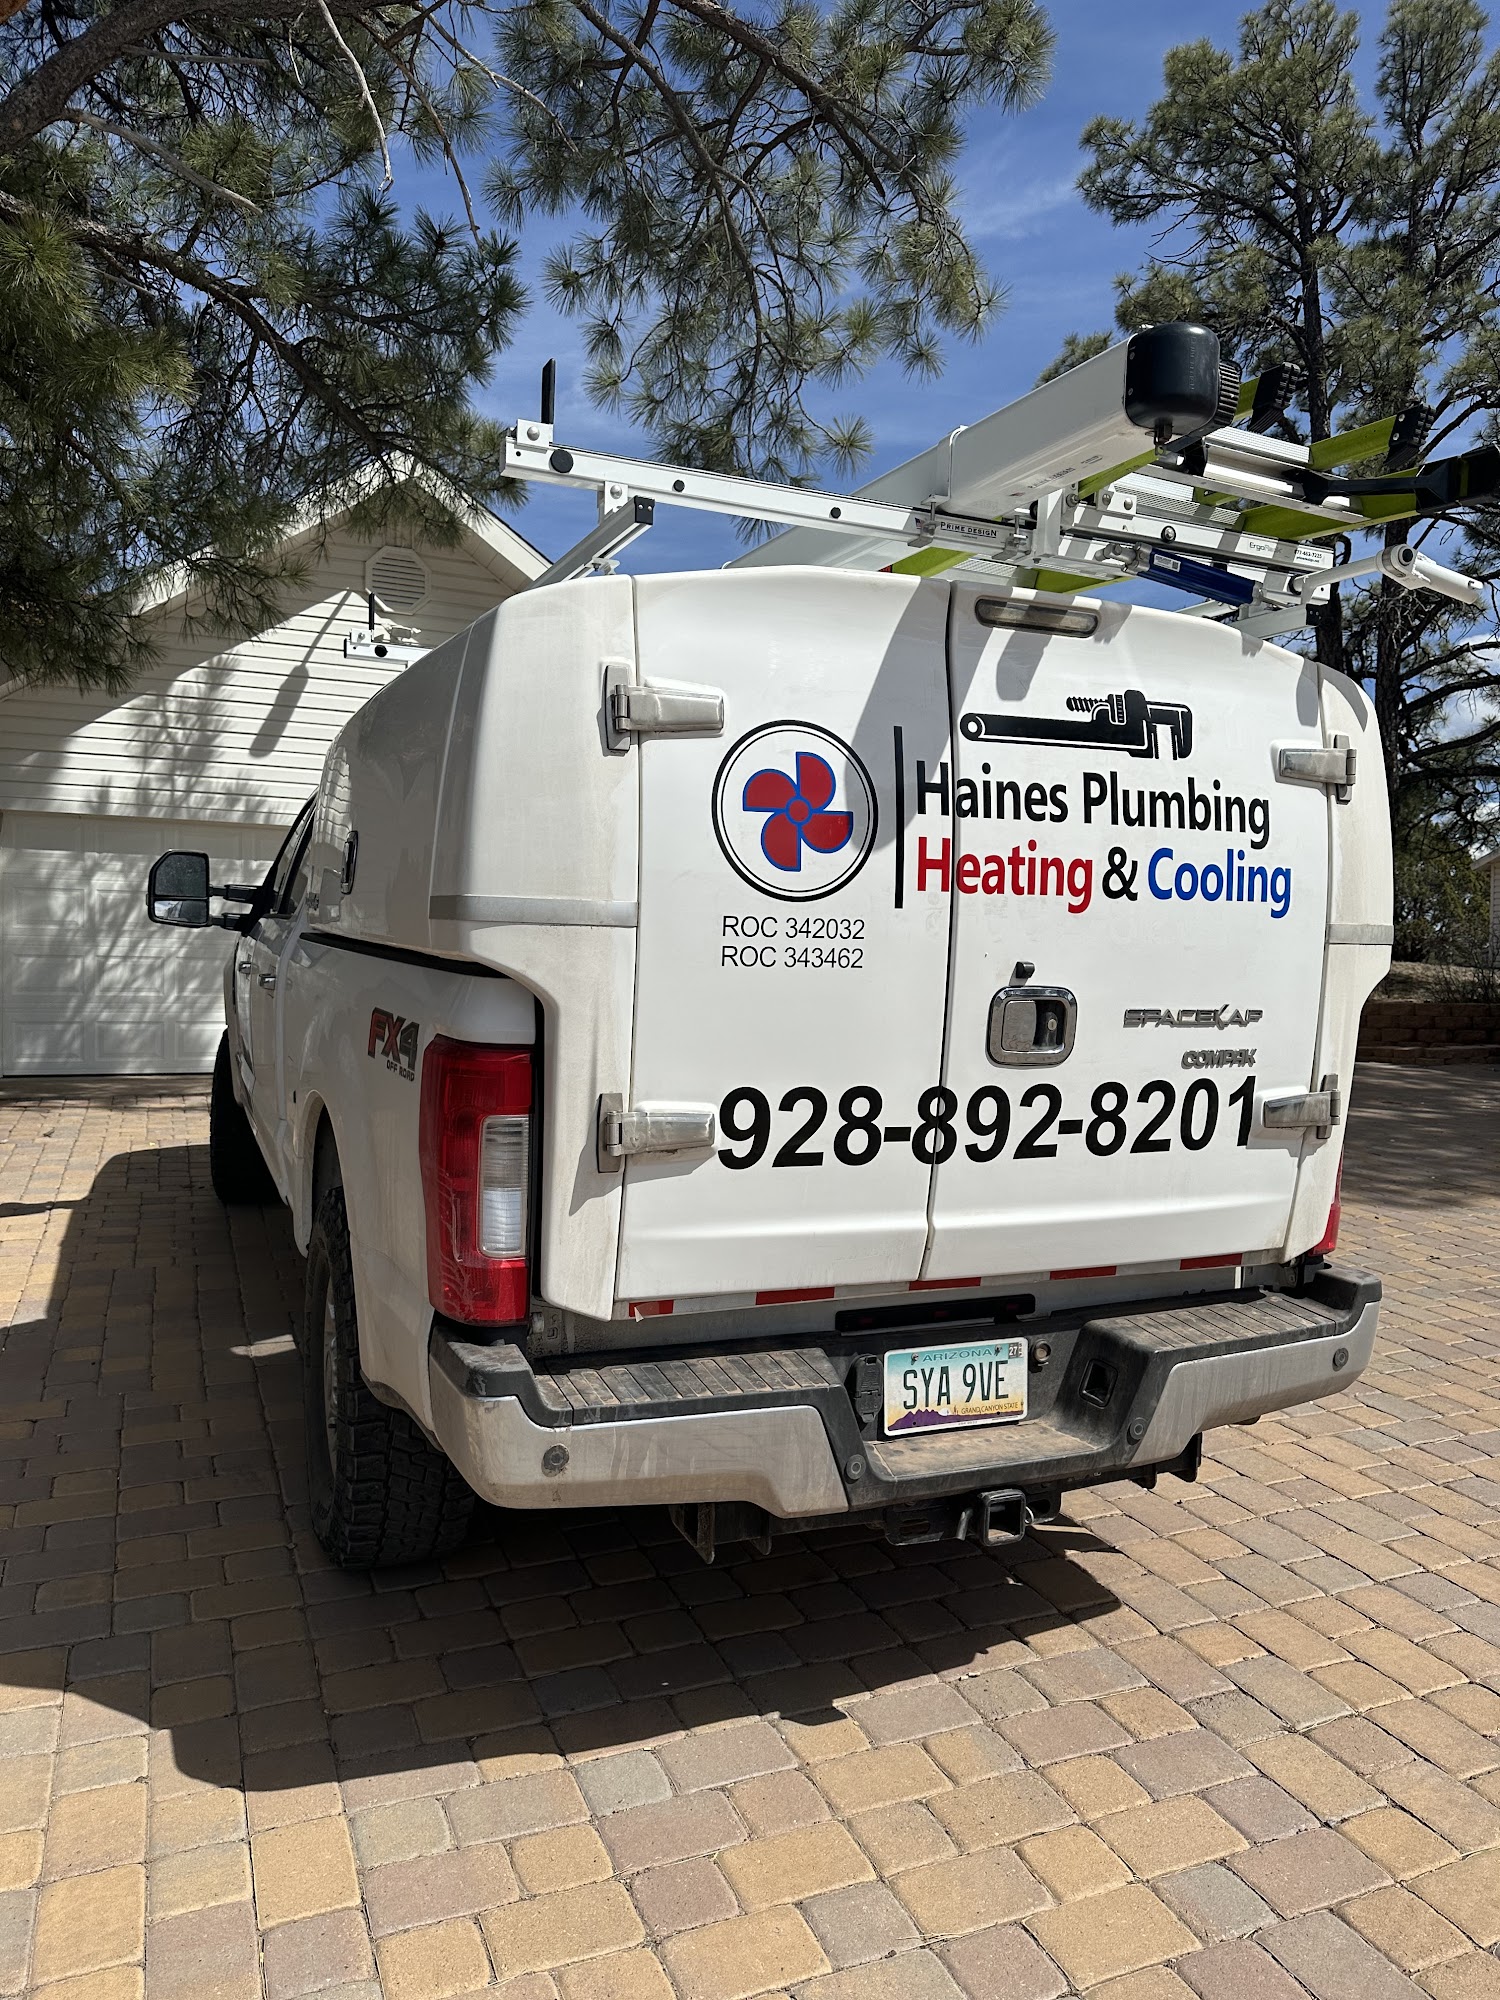 Haines Plumbing Heating & Cooling